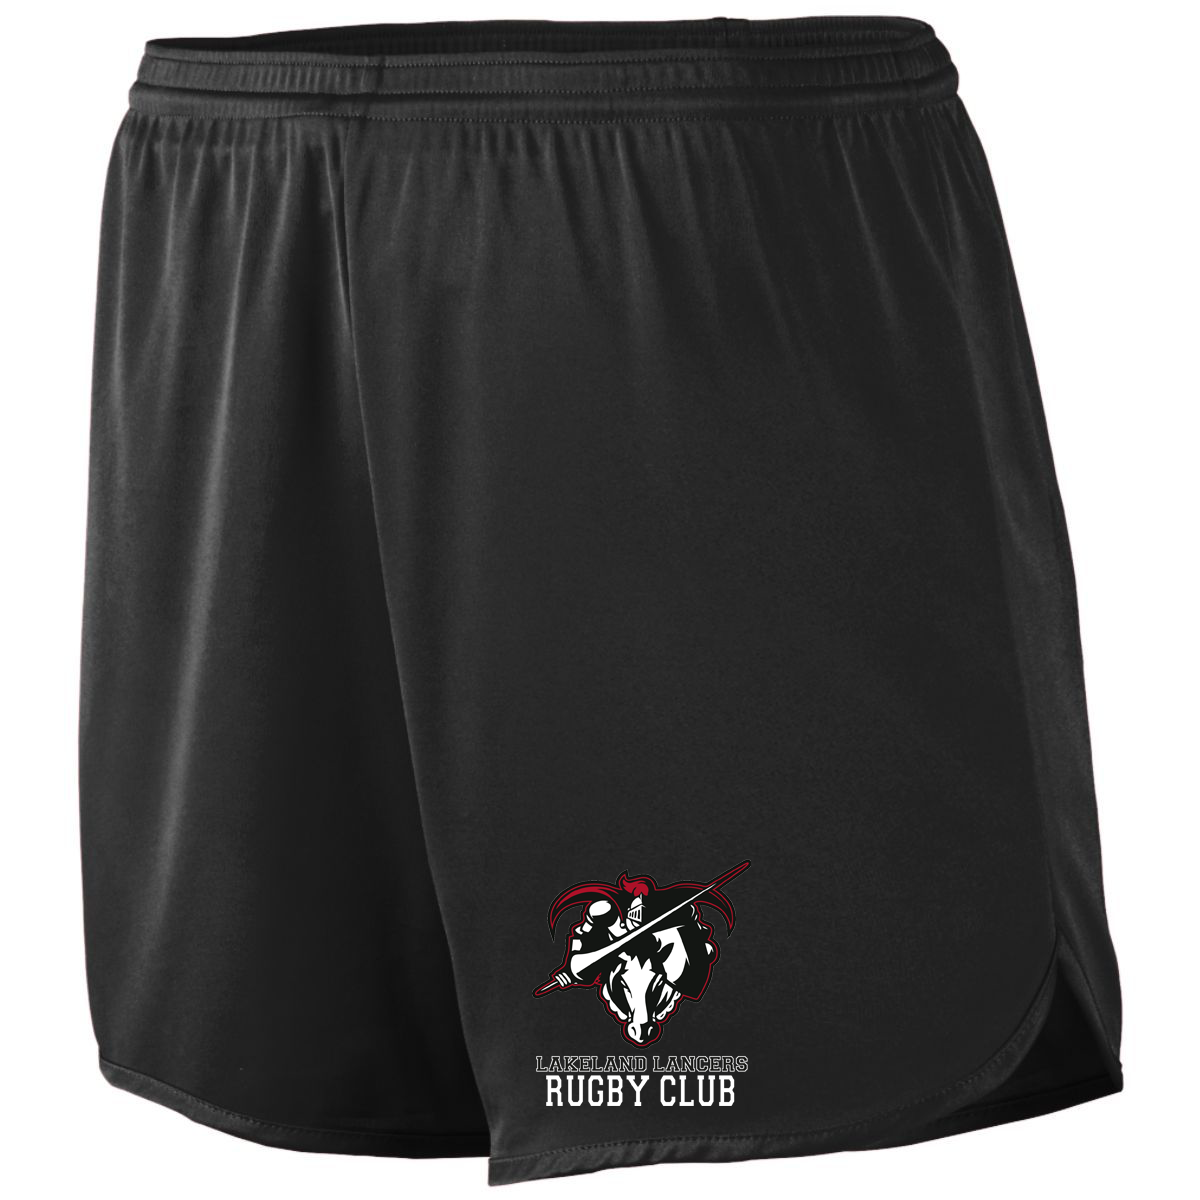 Lakeland Lancers Rugby Football Club Accelerate Shorts